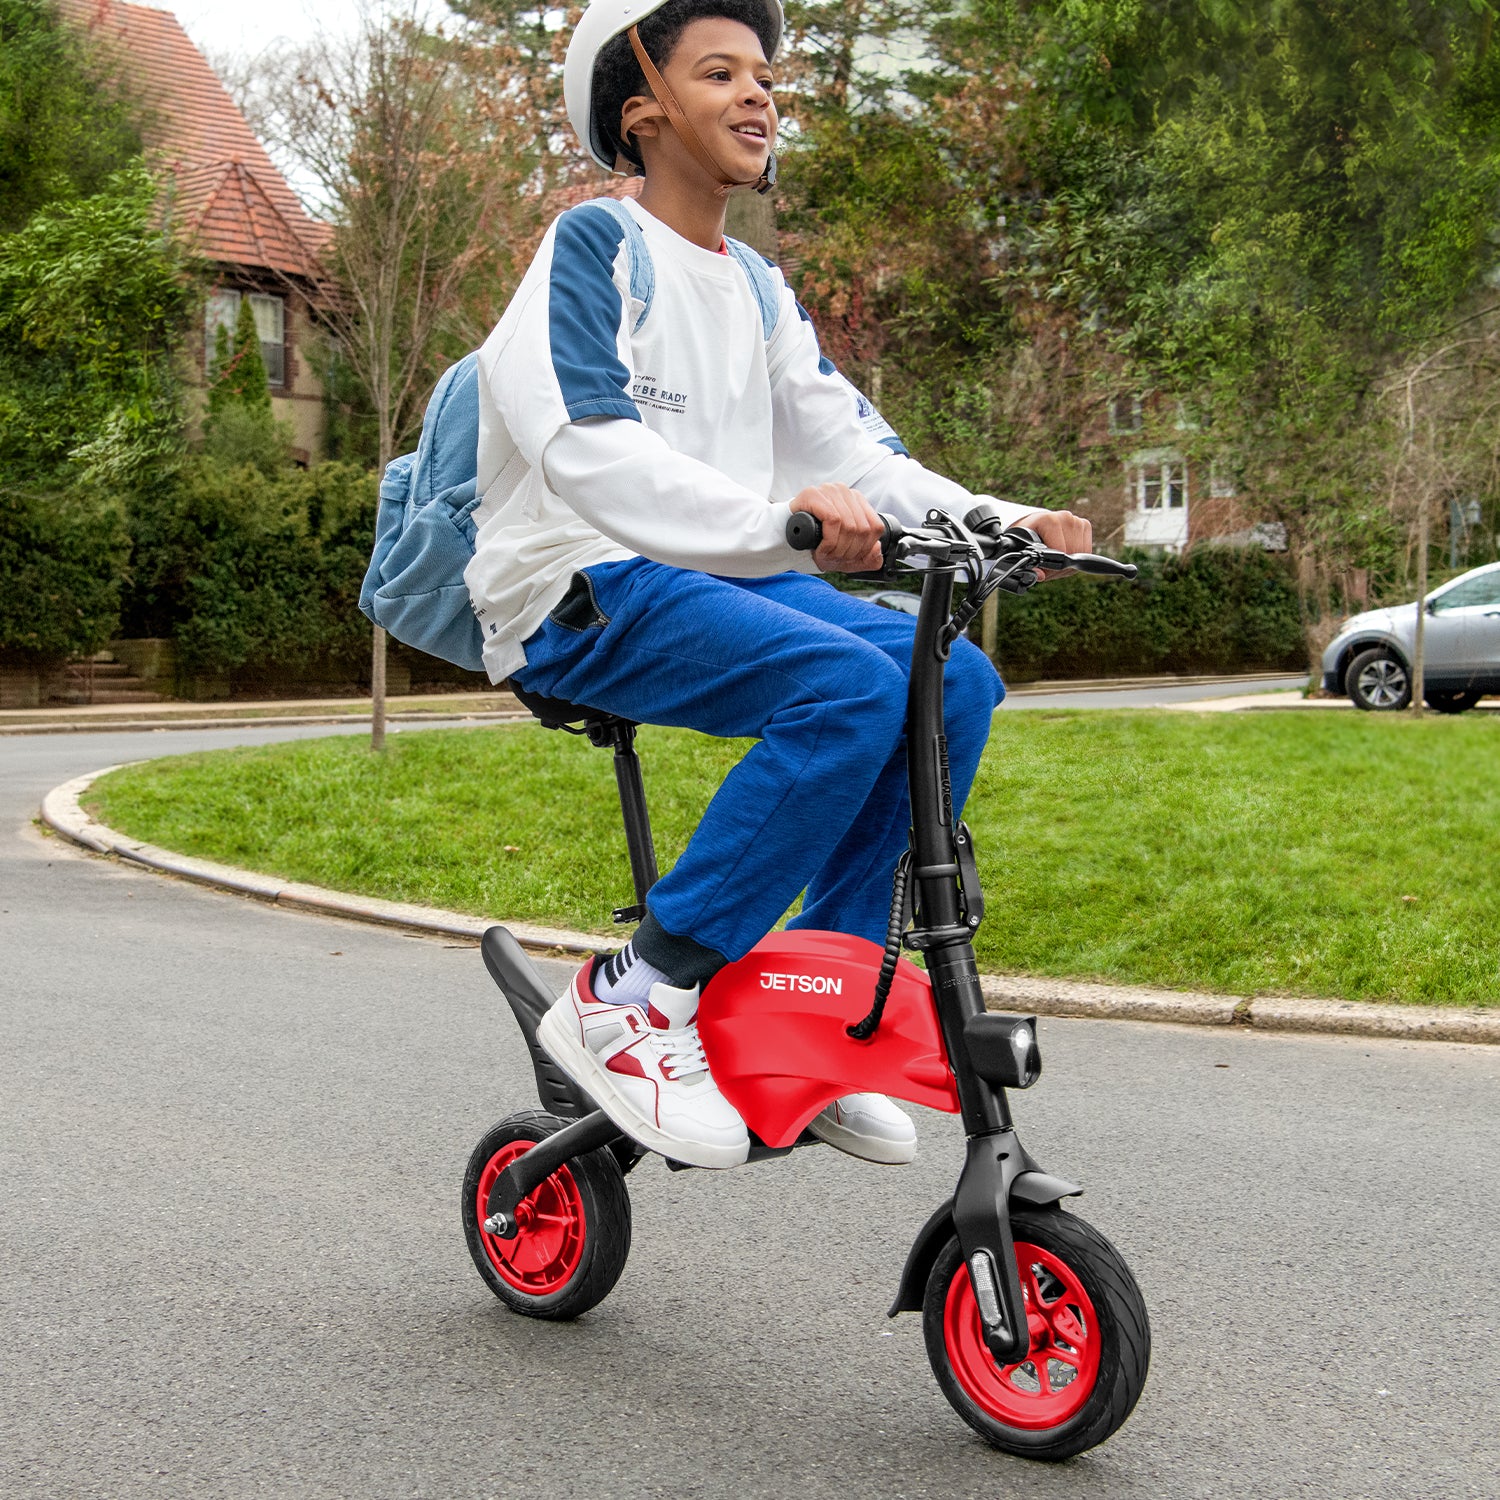 person riding the red LX10 in a neighborhood